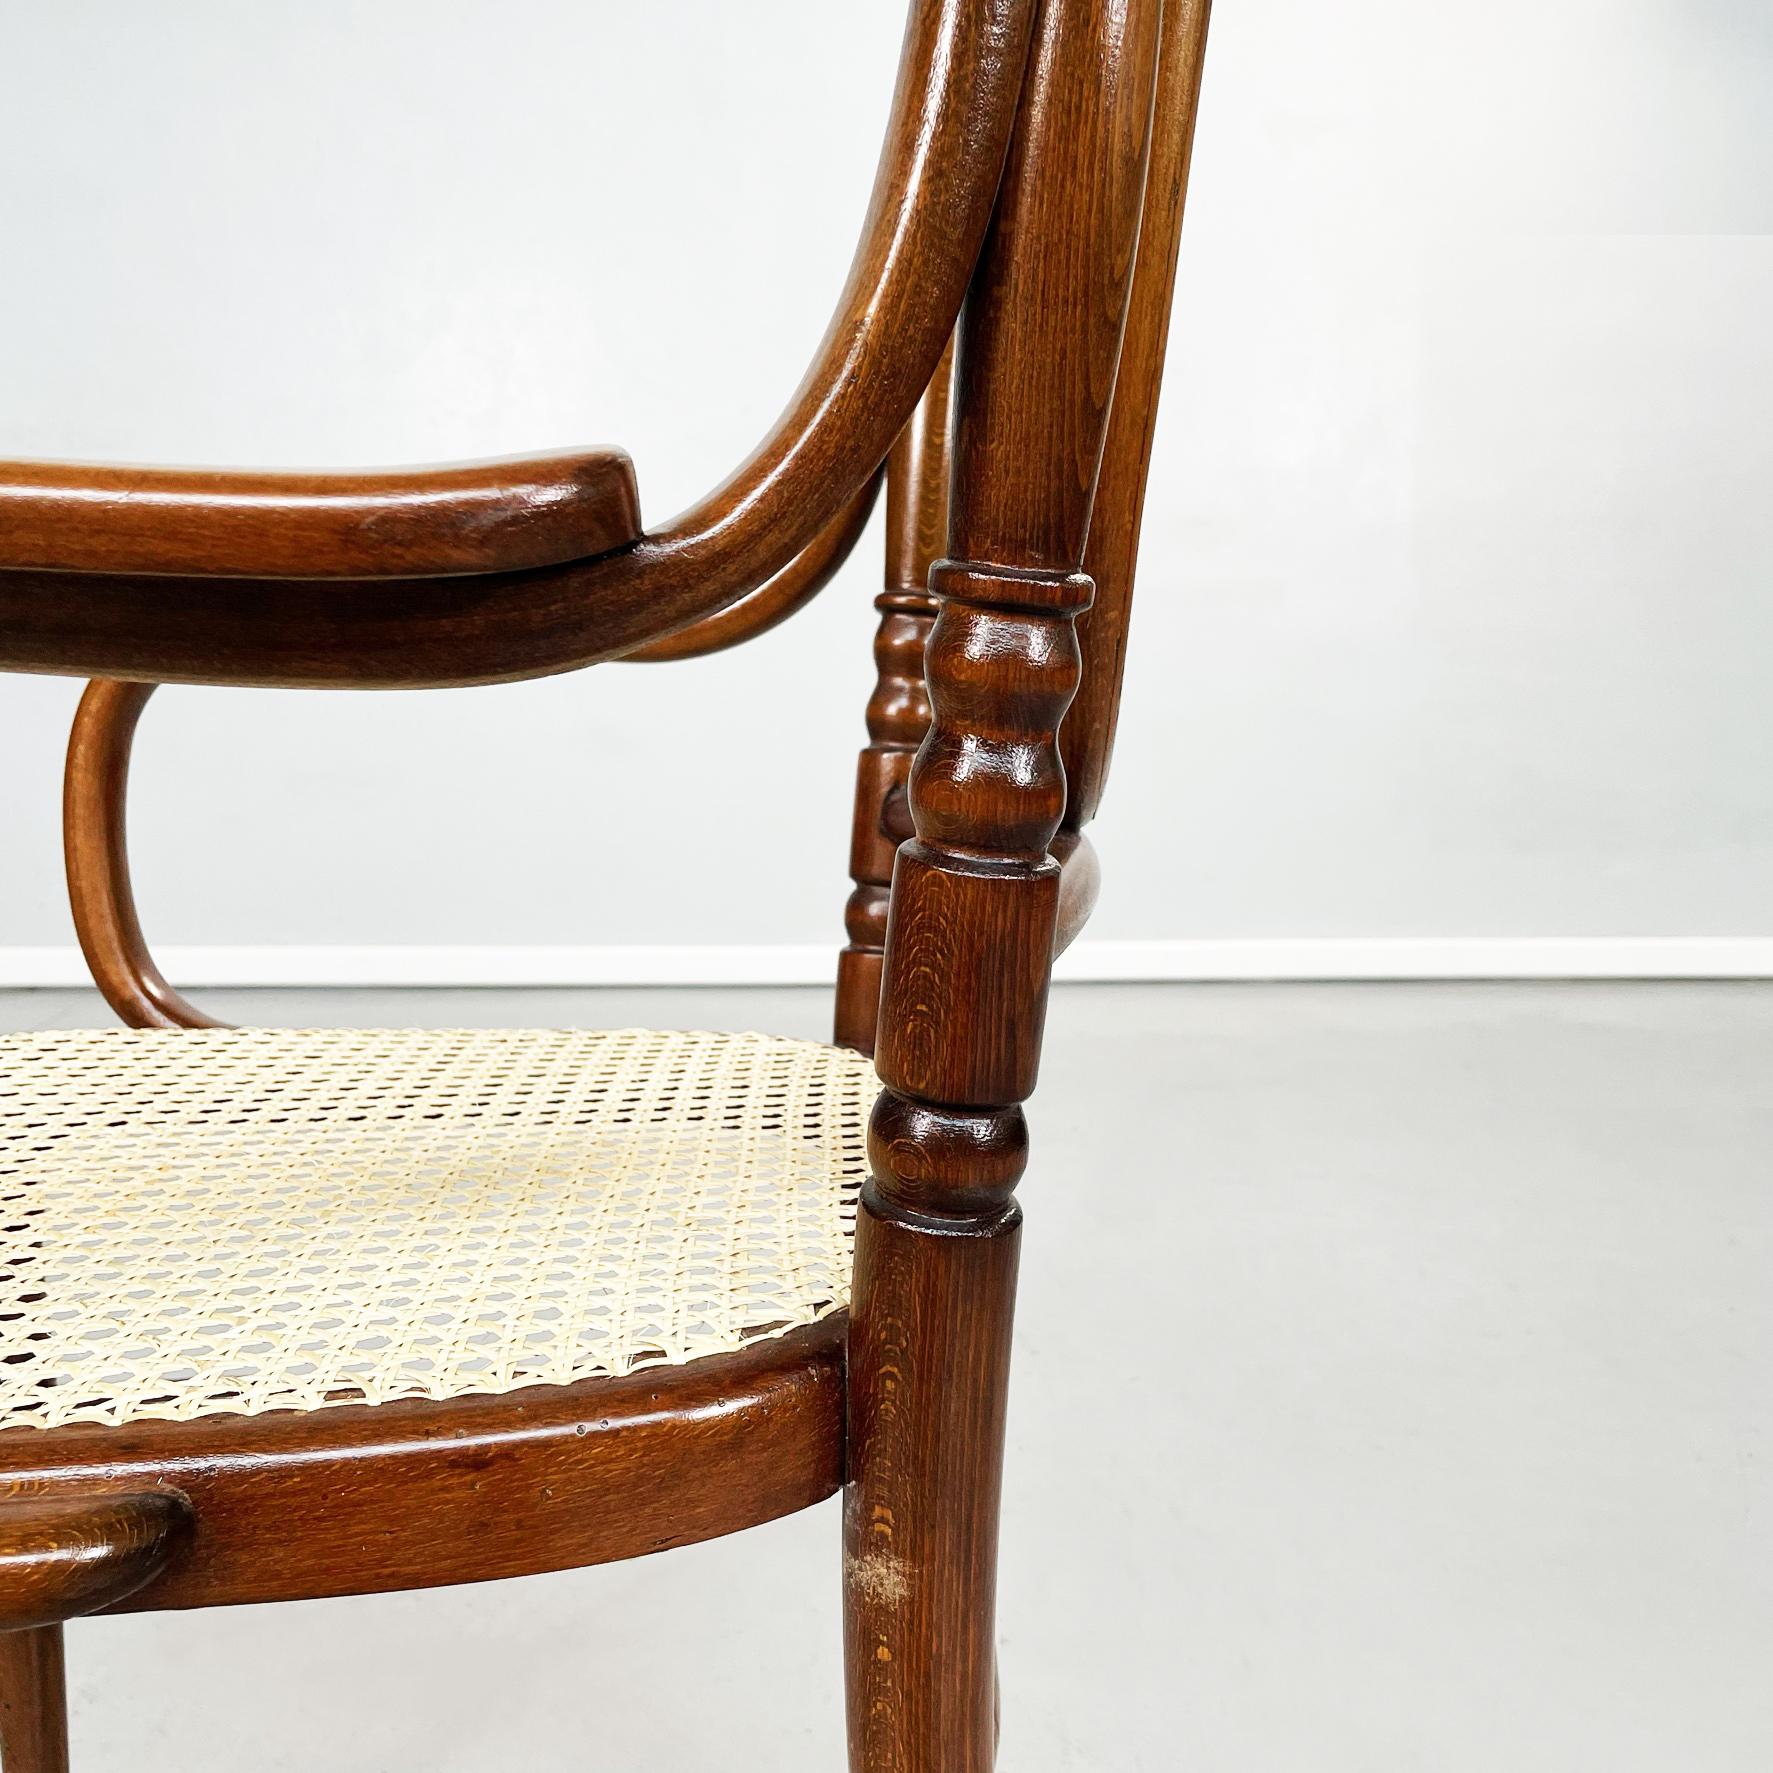 Austrian Chairs with Straw and Wood by Thonet, 1900s For Sale 7